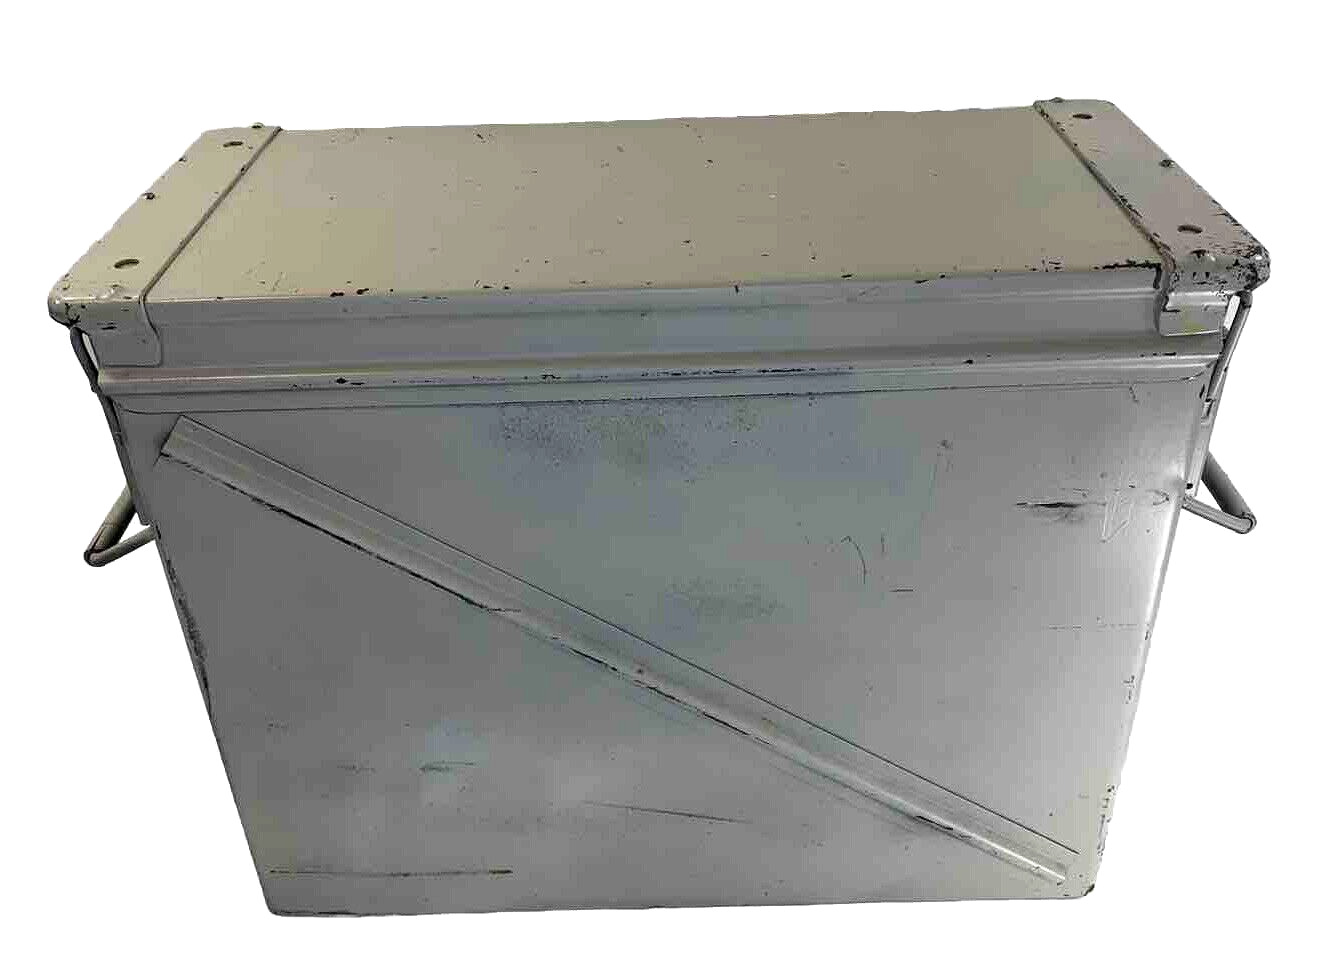 50 Cal Ammo Can Painted Military Empty Aluminum Ammunition Box Crate